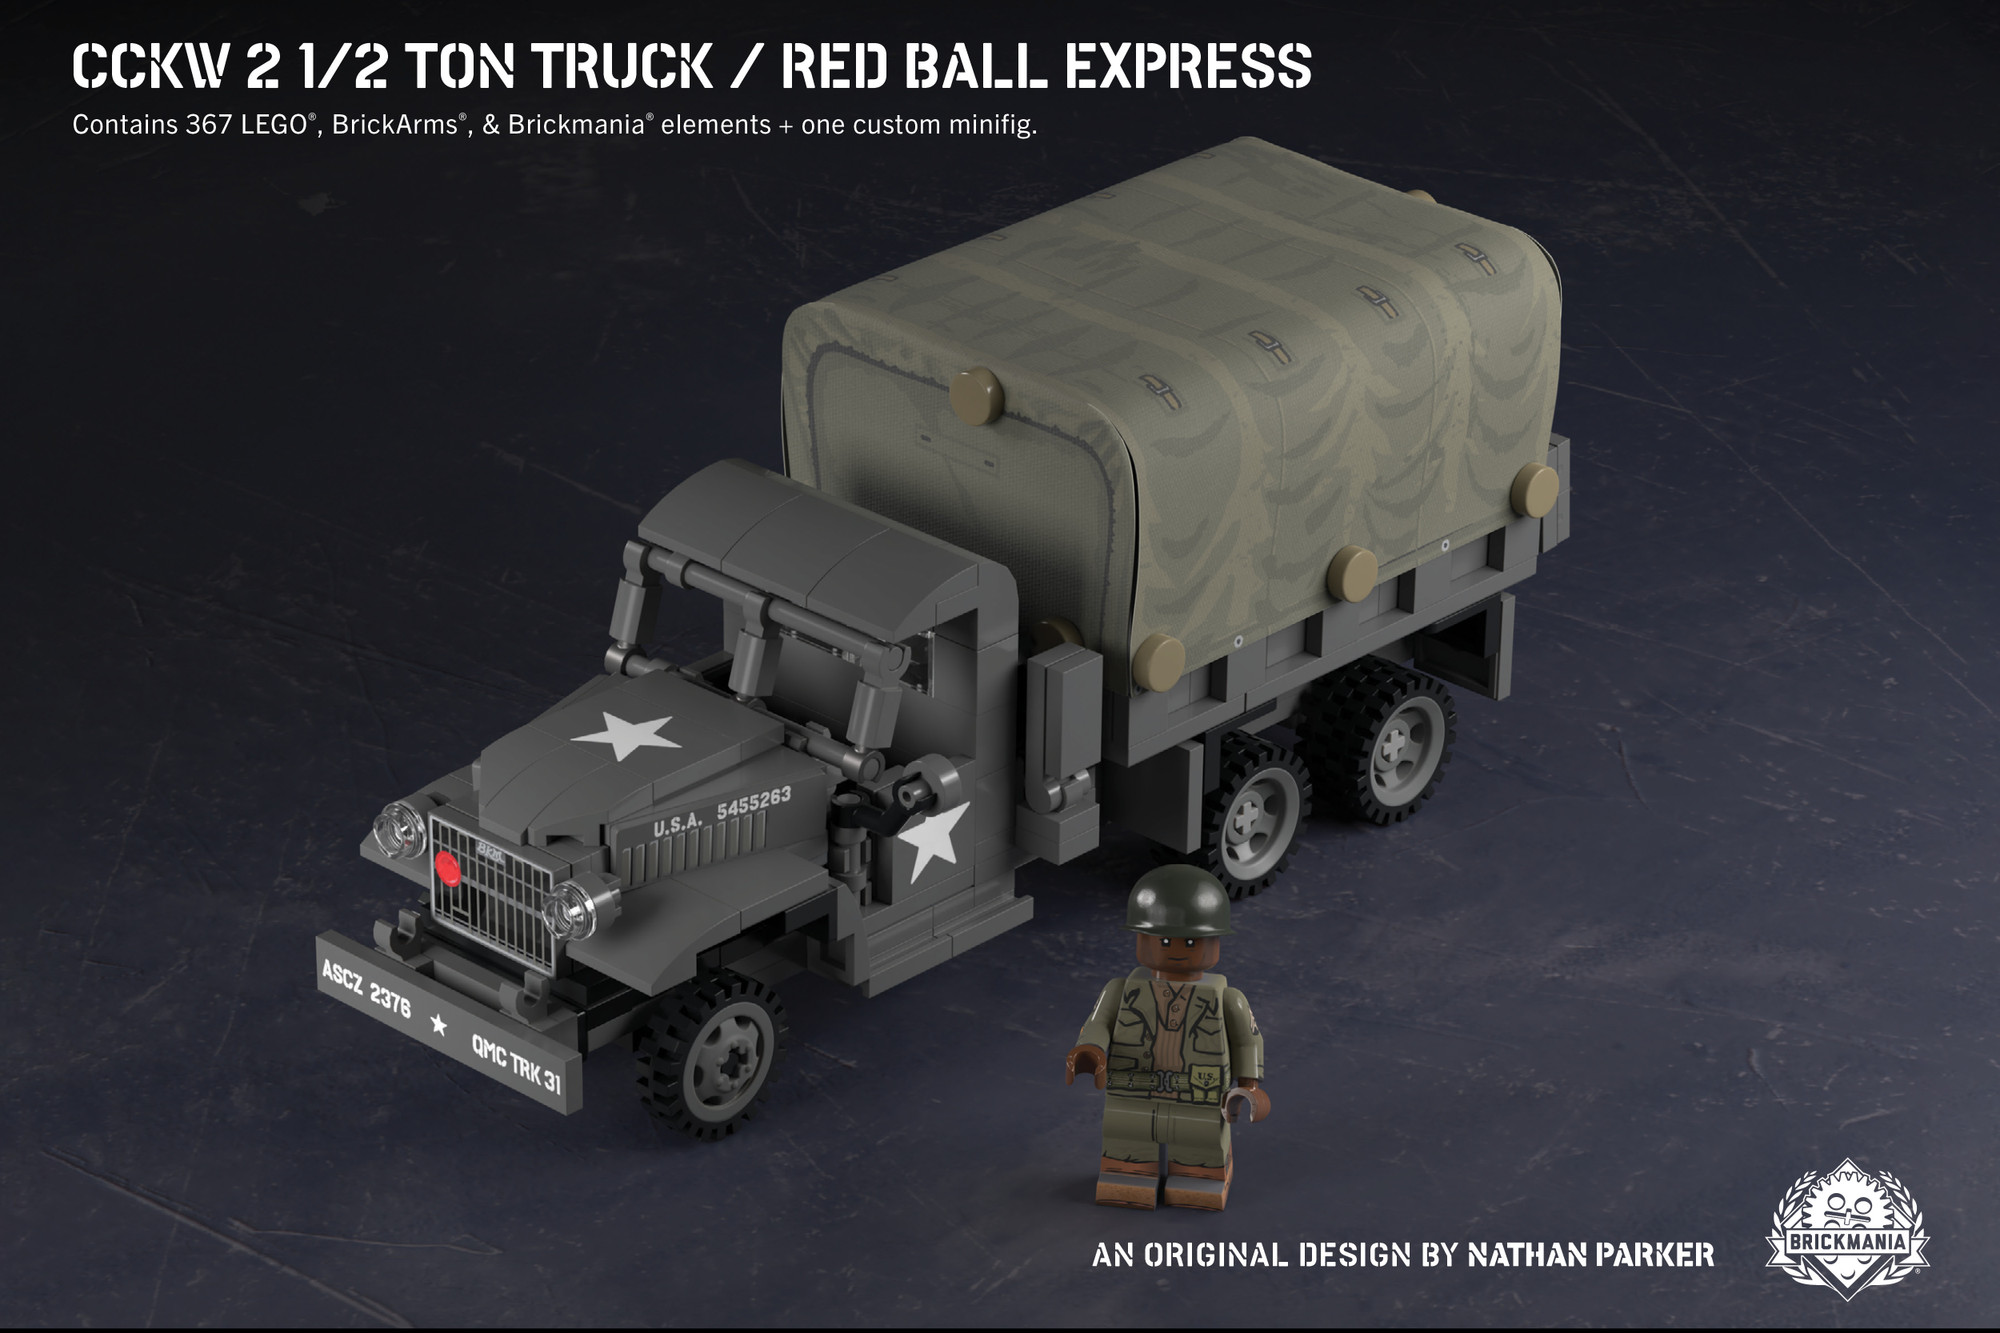 CCKW 2 1/2 Ton Truck – Red Ball Express